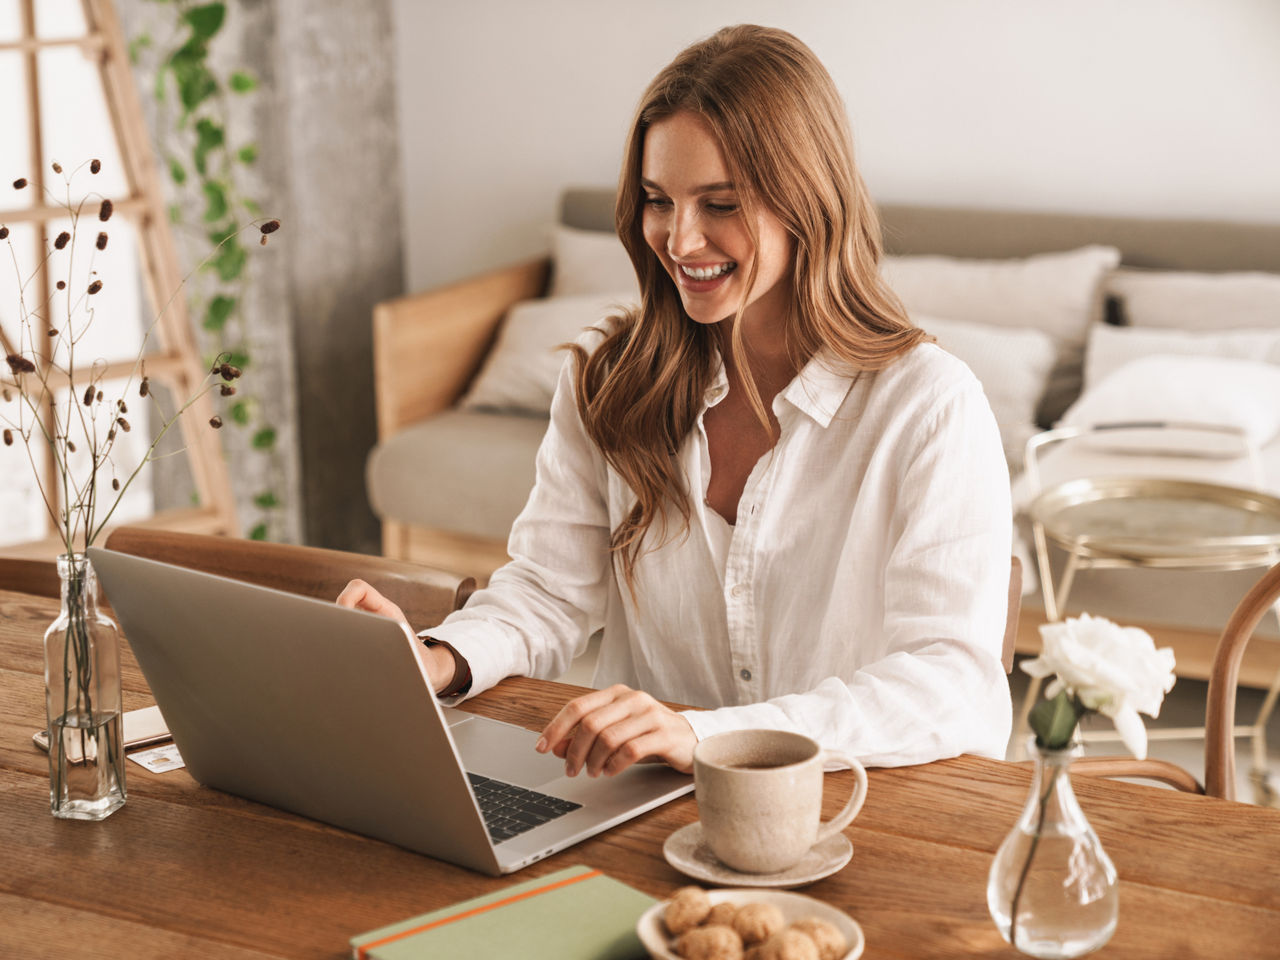 Business woman sitting indoors using laptop computer